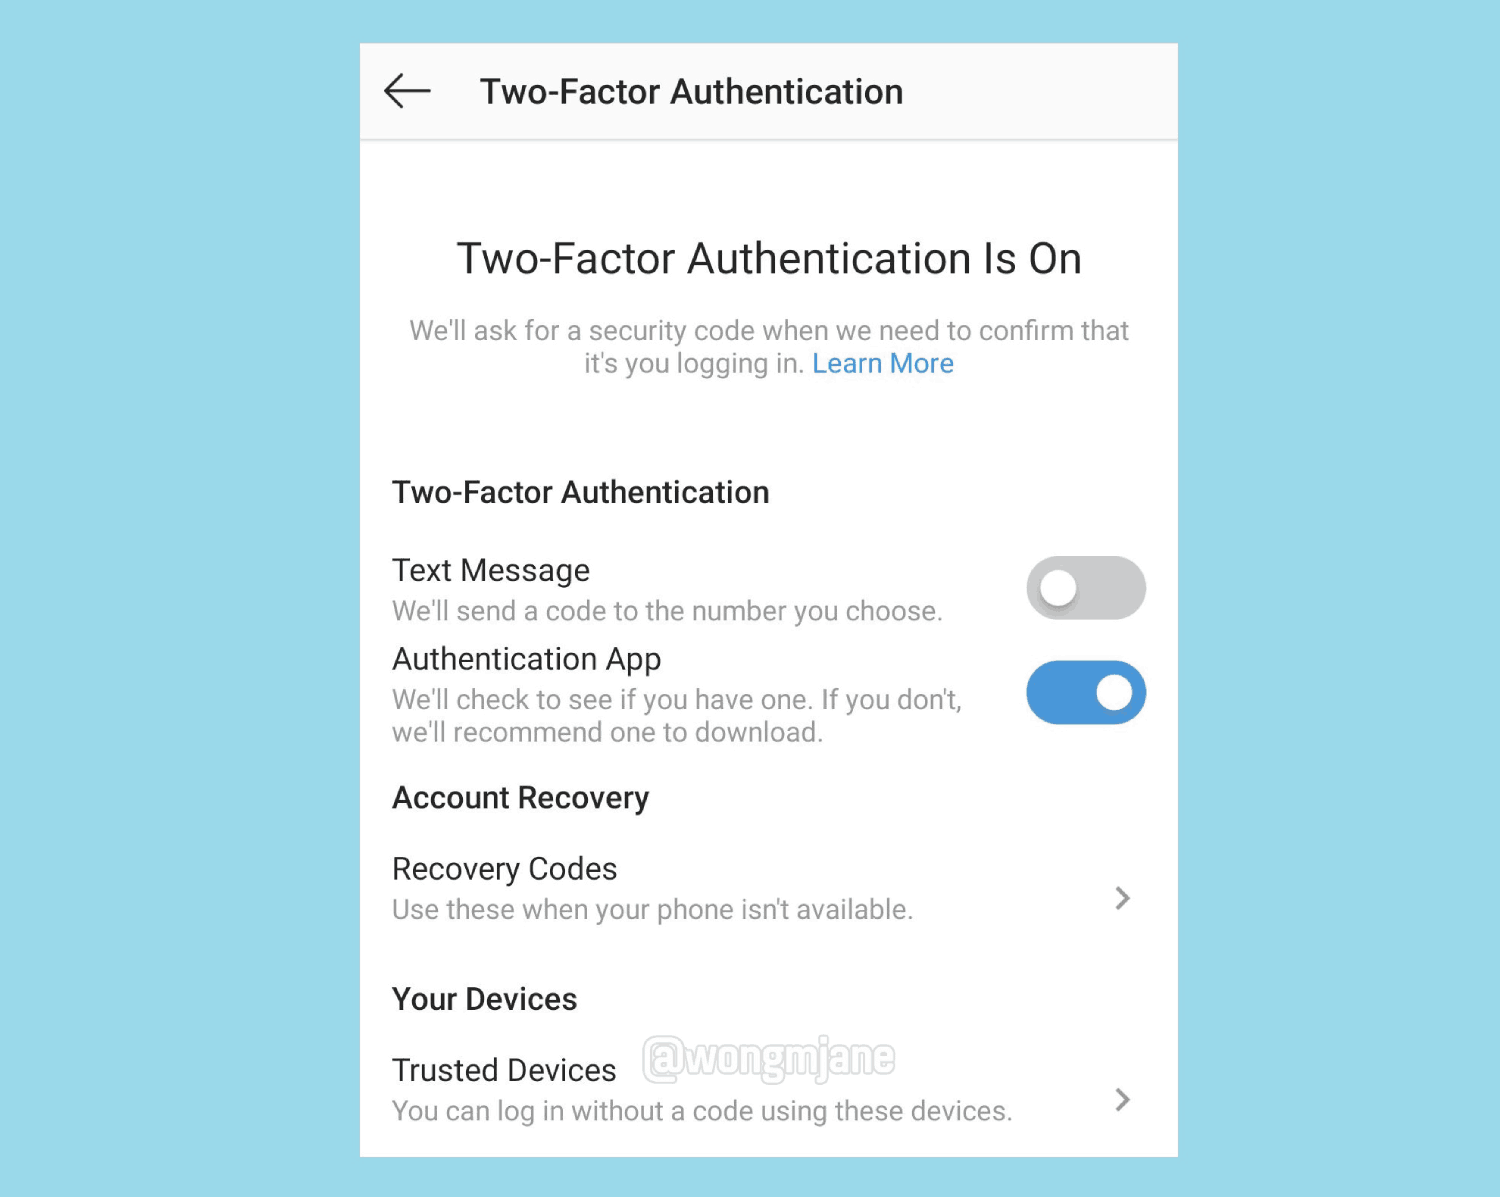 Instagram is working on "Trusted Devices" management in Two-Factor Authentication settings in its app. Using this feature Instagrammers can log in without a 2FA code